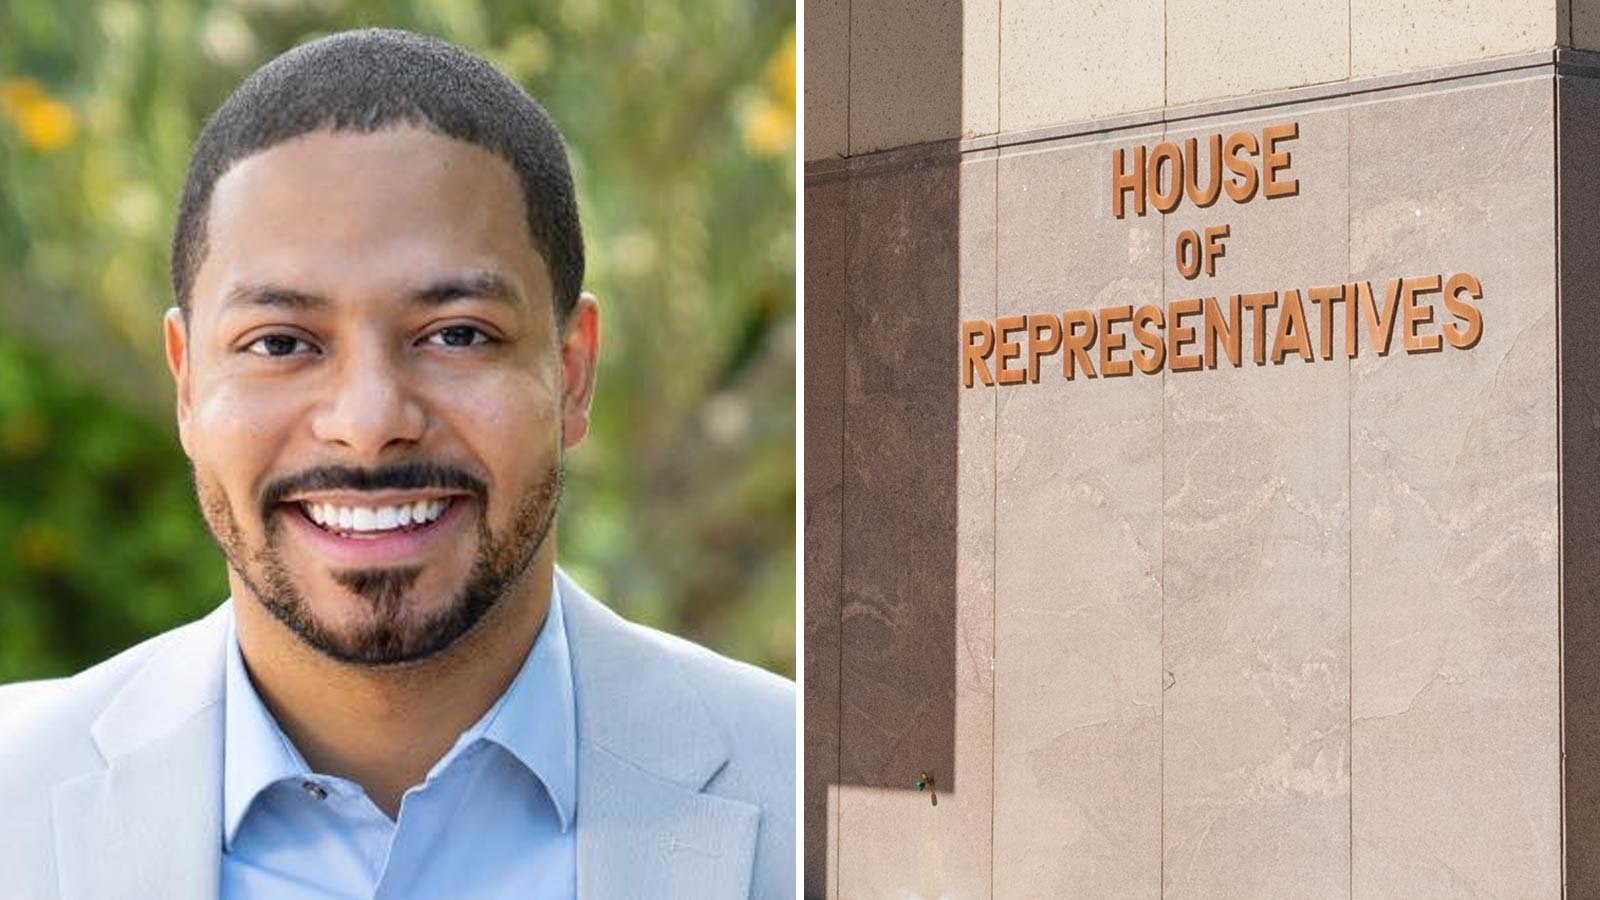 Democratic Rep. Jevin Hodge resigns from Arizona House in wake of sexual misconduct report